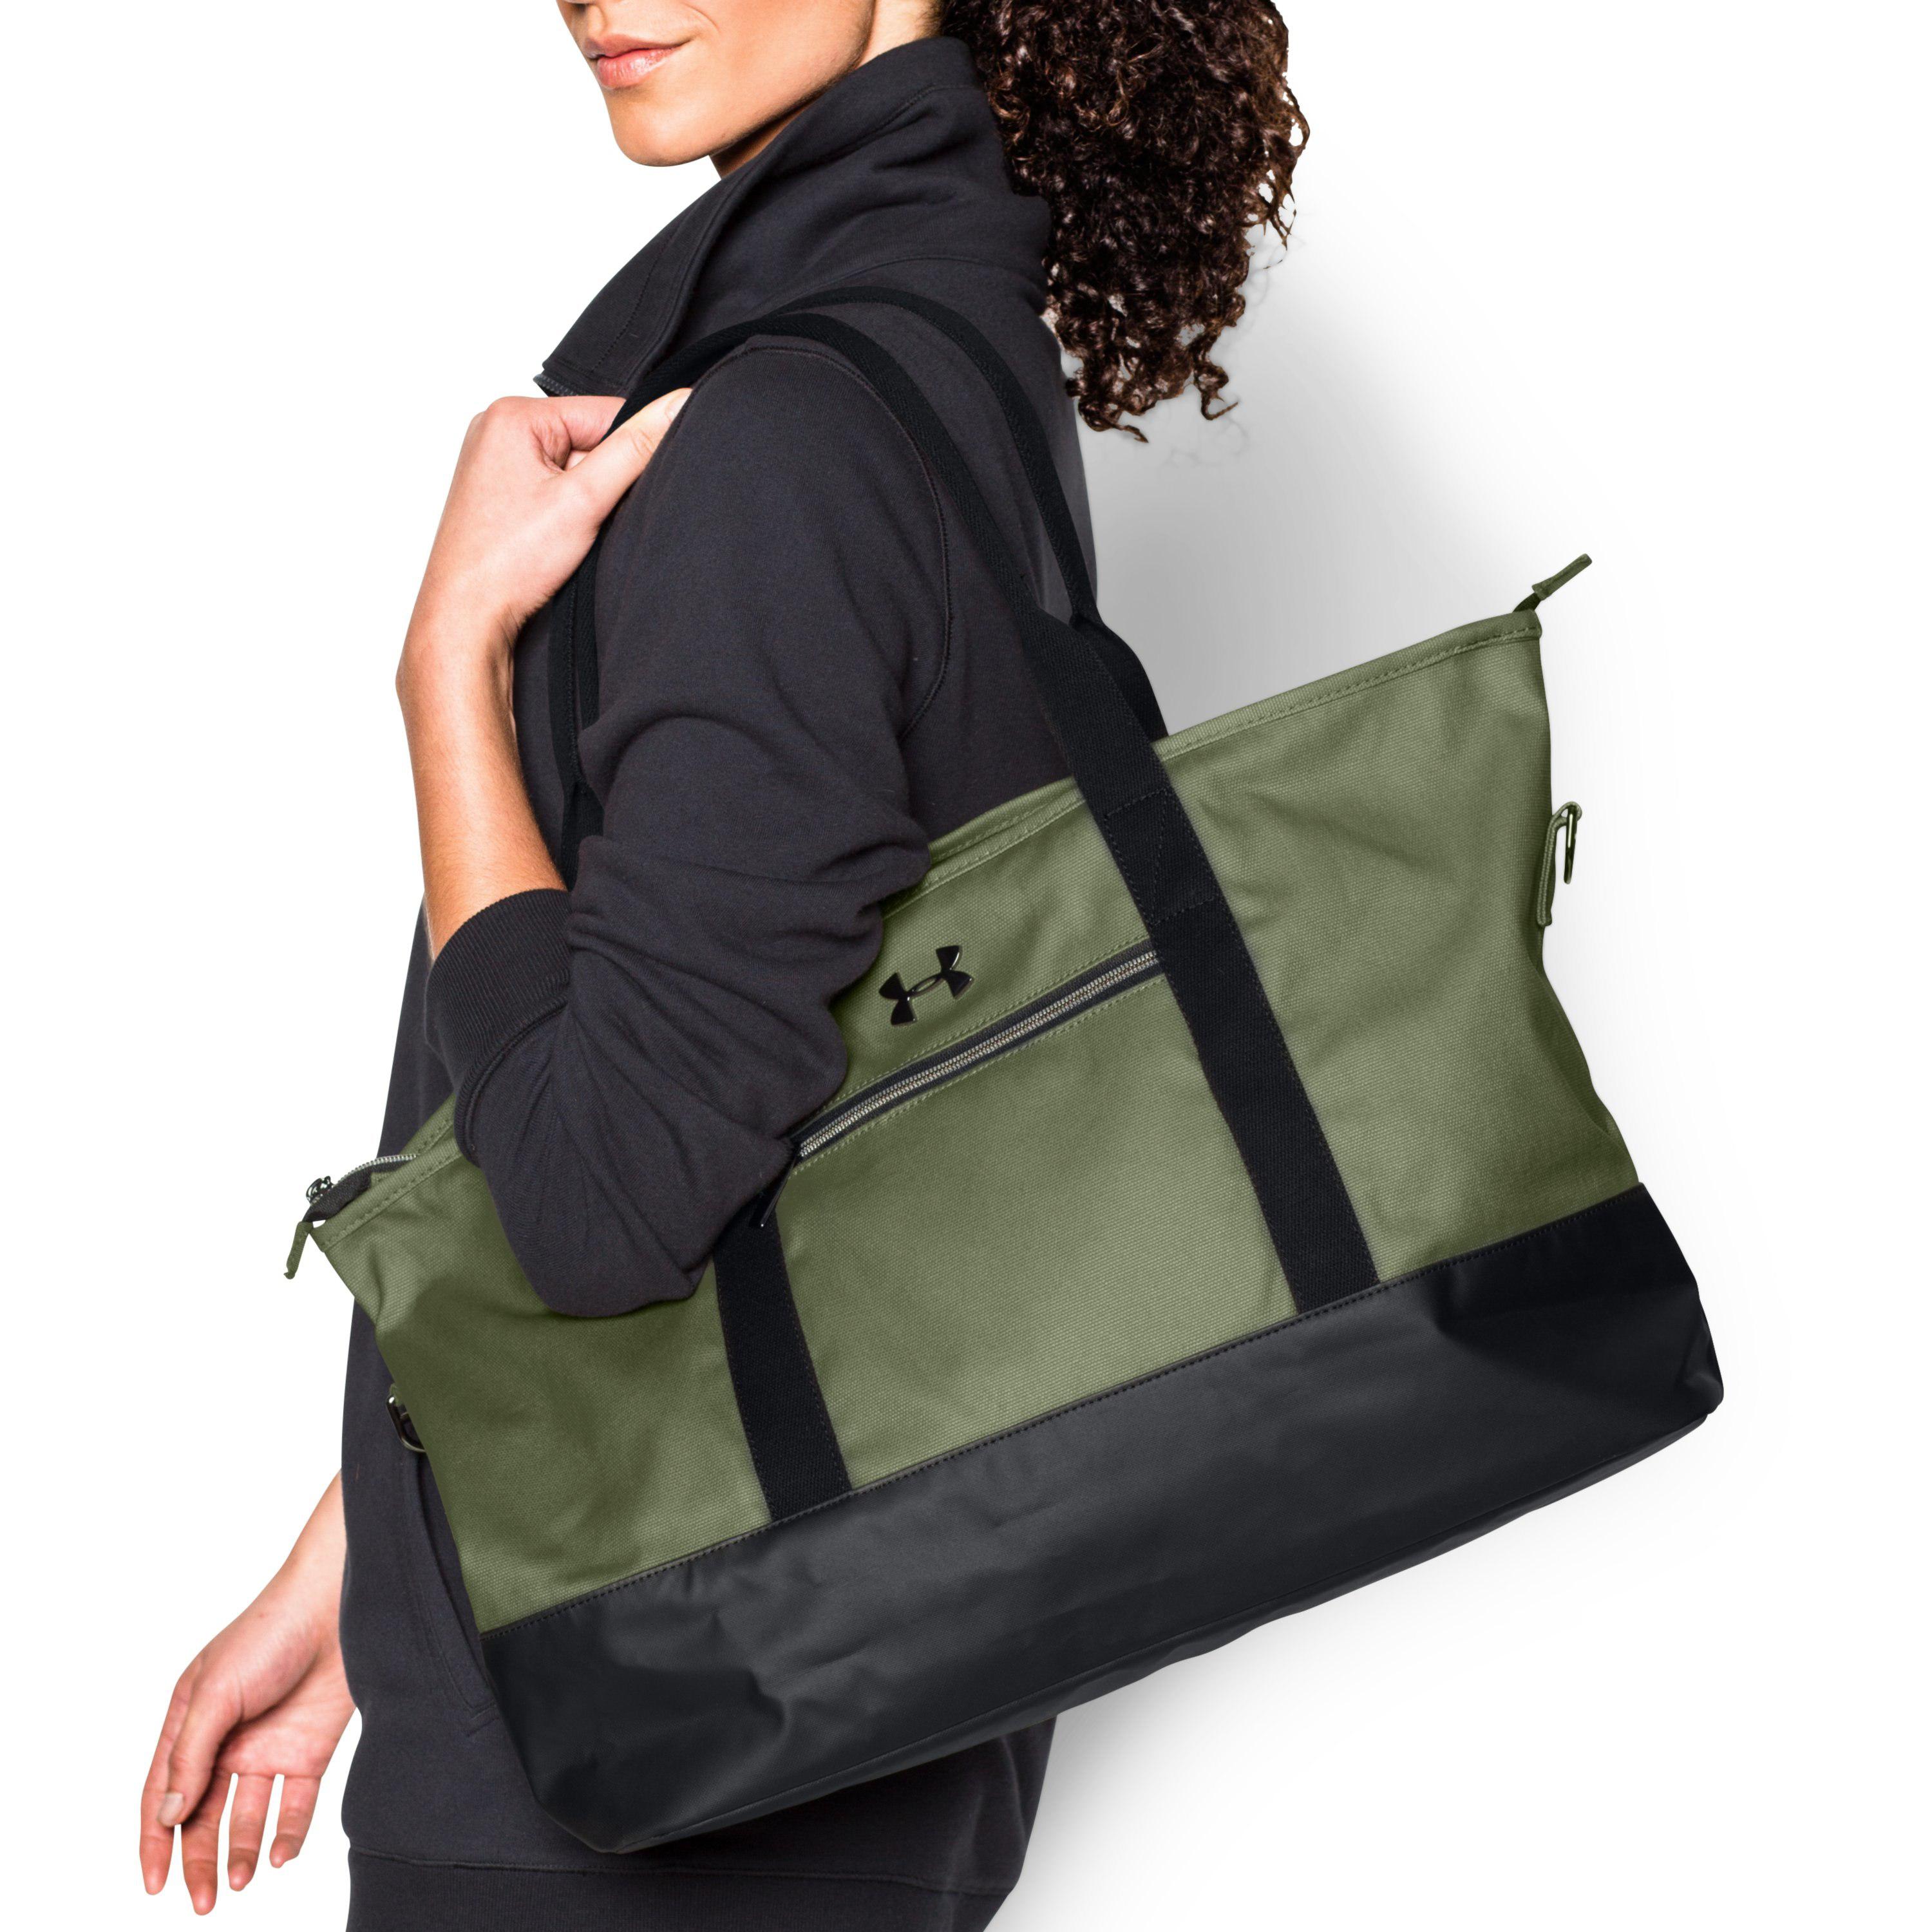 Under Armour Women's Ua Storm Premier Tote in Green | Lyst